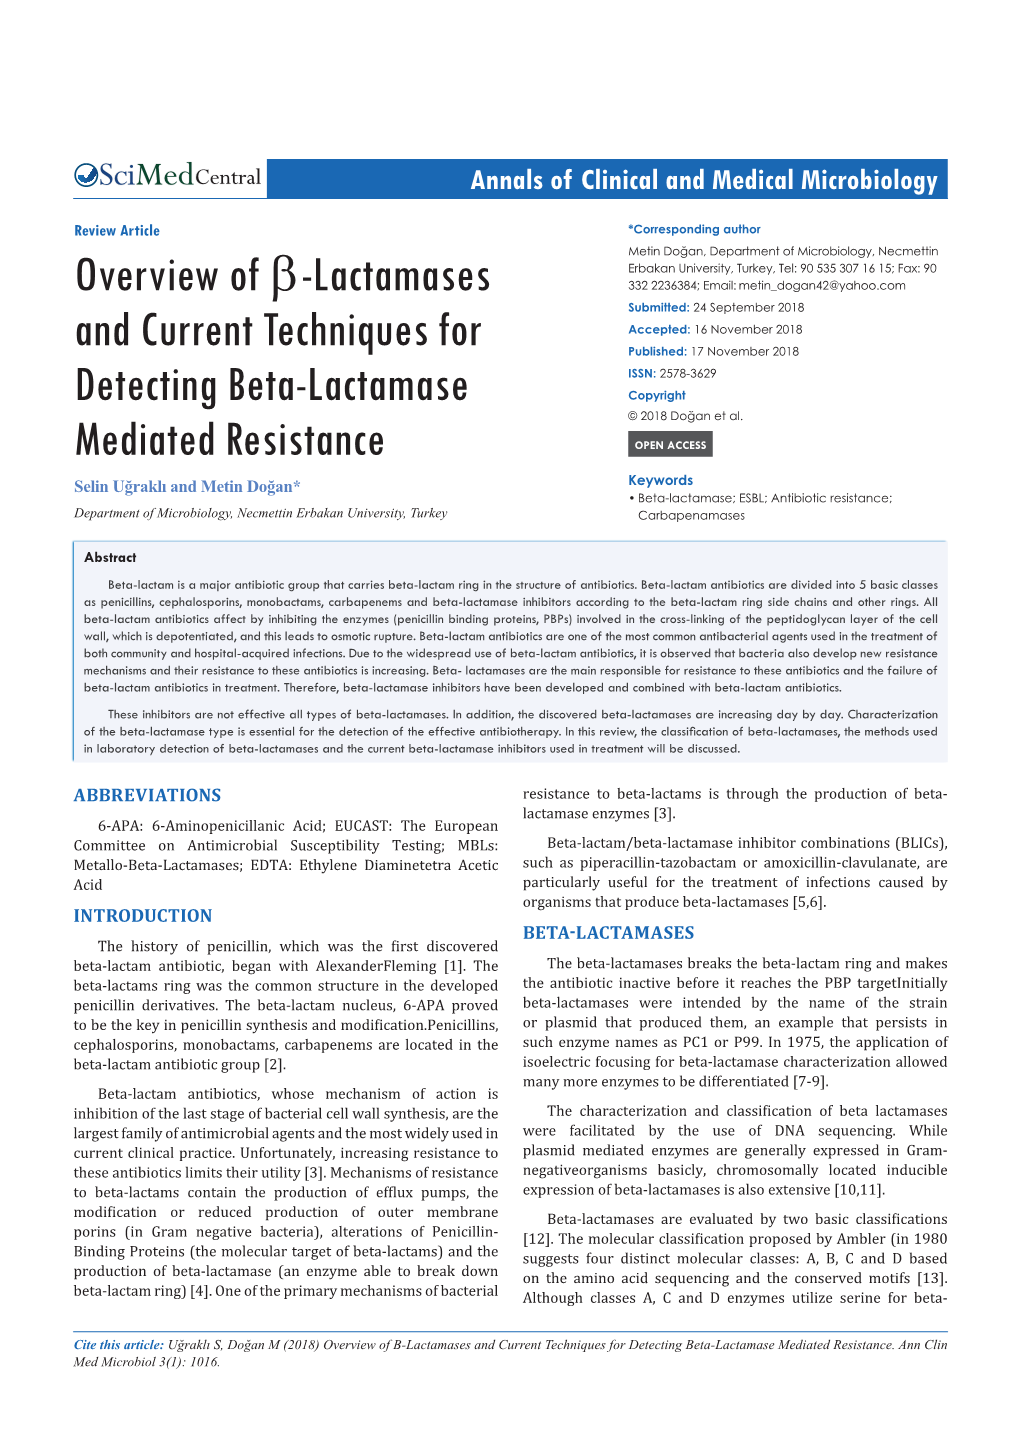 Overview of Β-Lactamases and Current Techniques for Detecting Beta-Lactamase Mediated Resistance